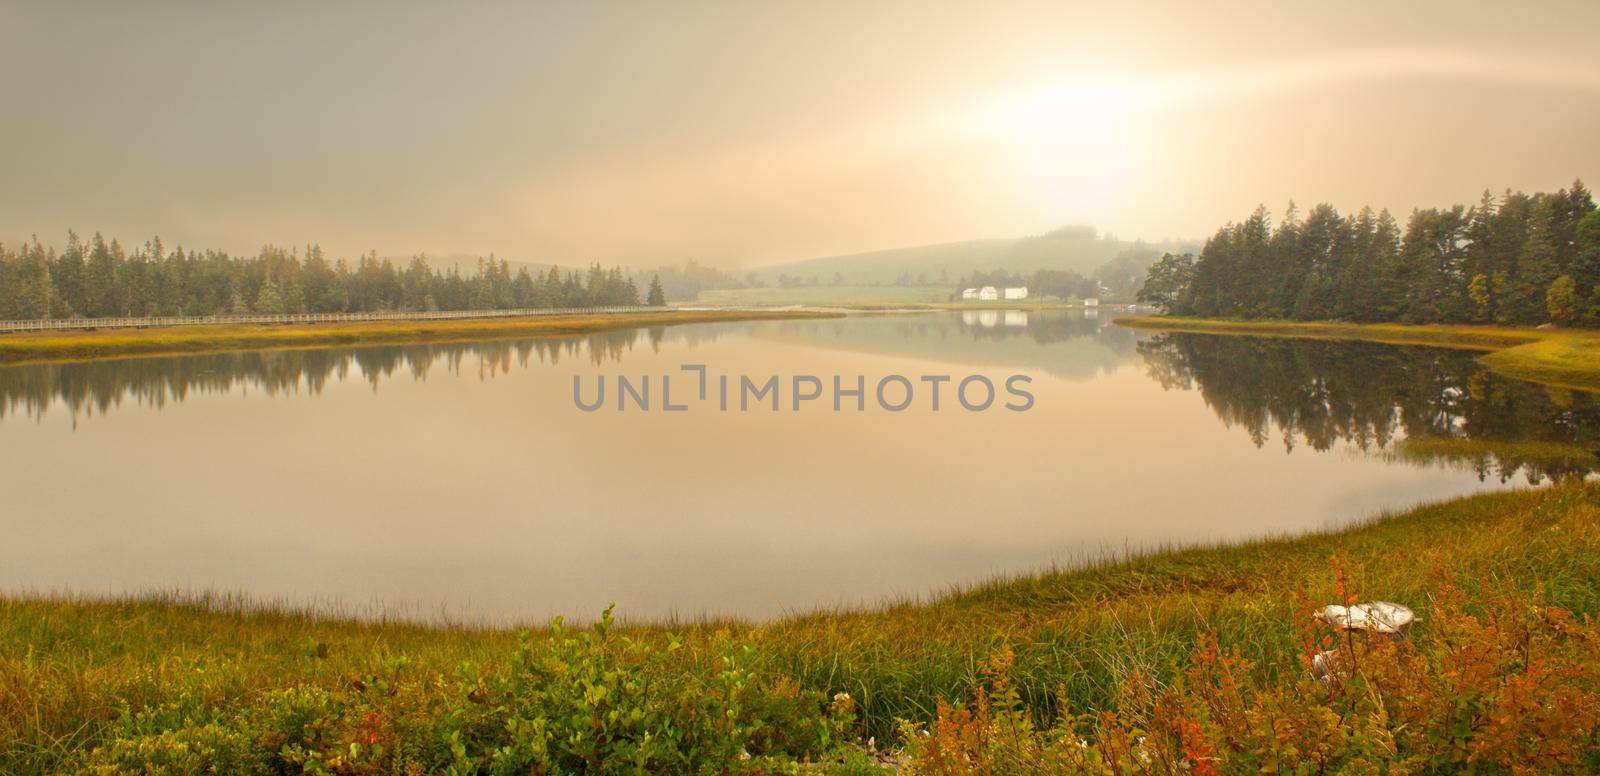 beside the boardwalk at Rissers Campground in Nova Scotia, and idyllic lake and hillside in early morning light 